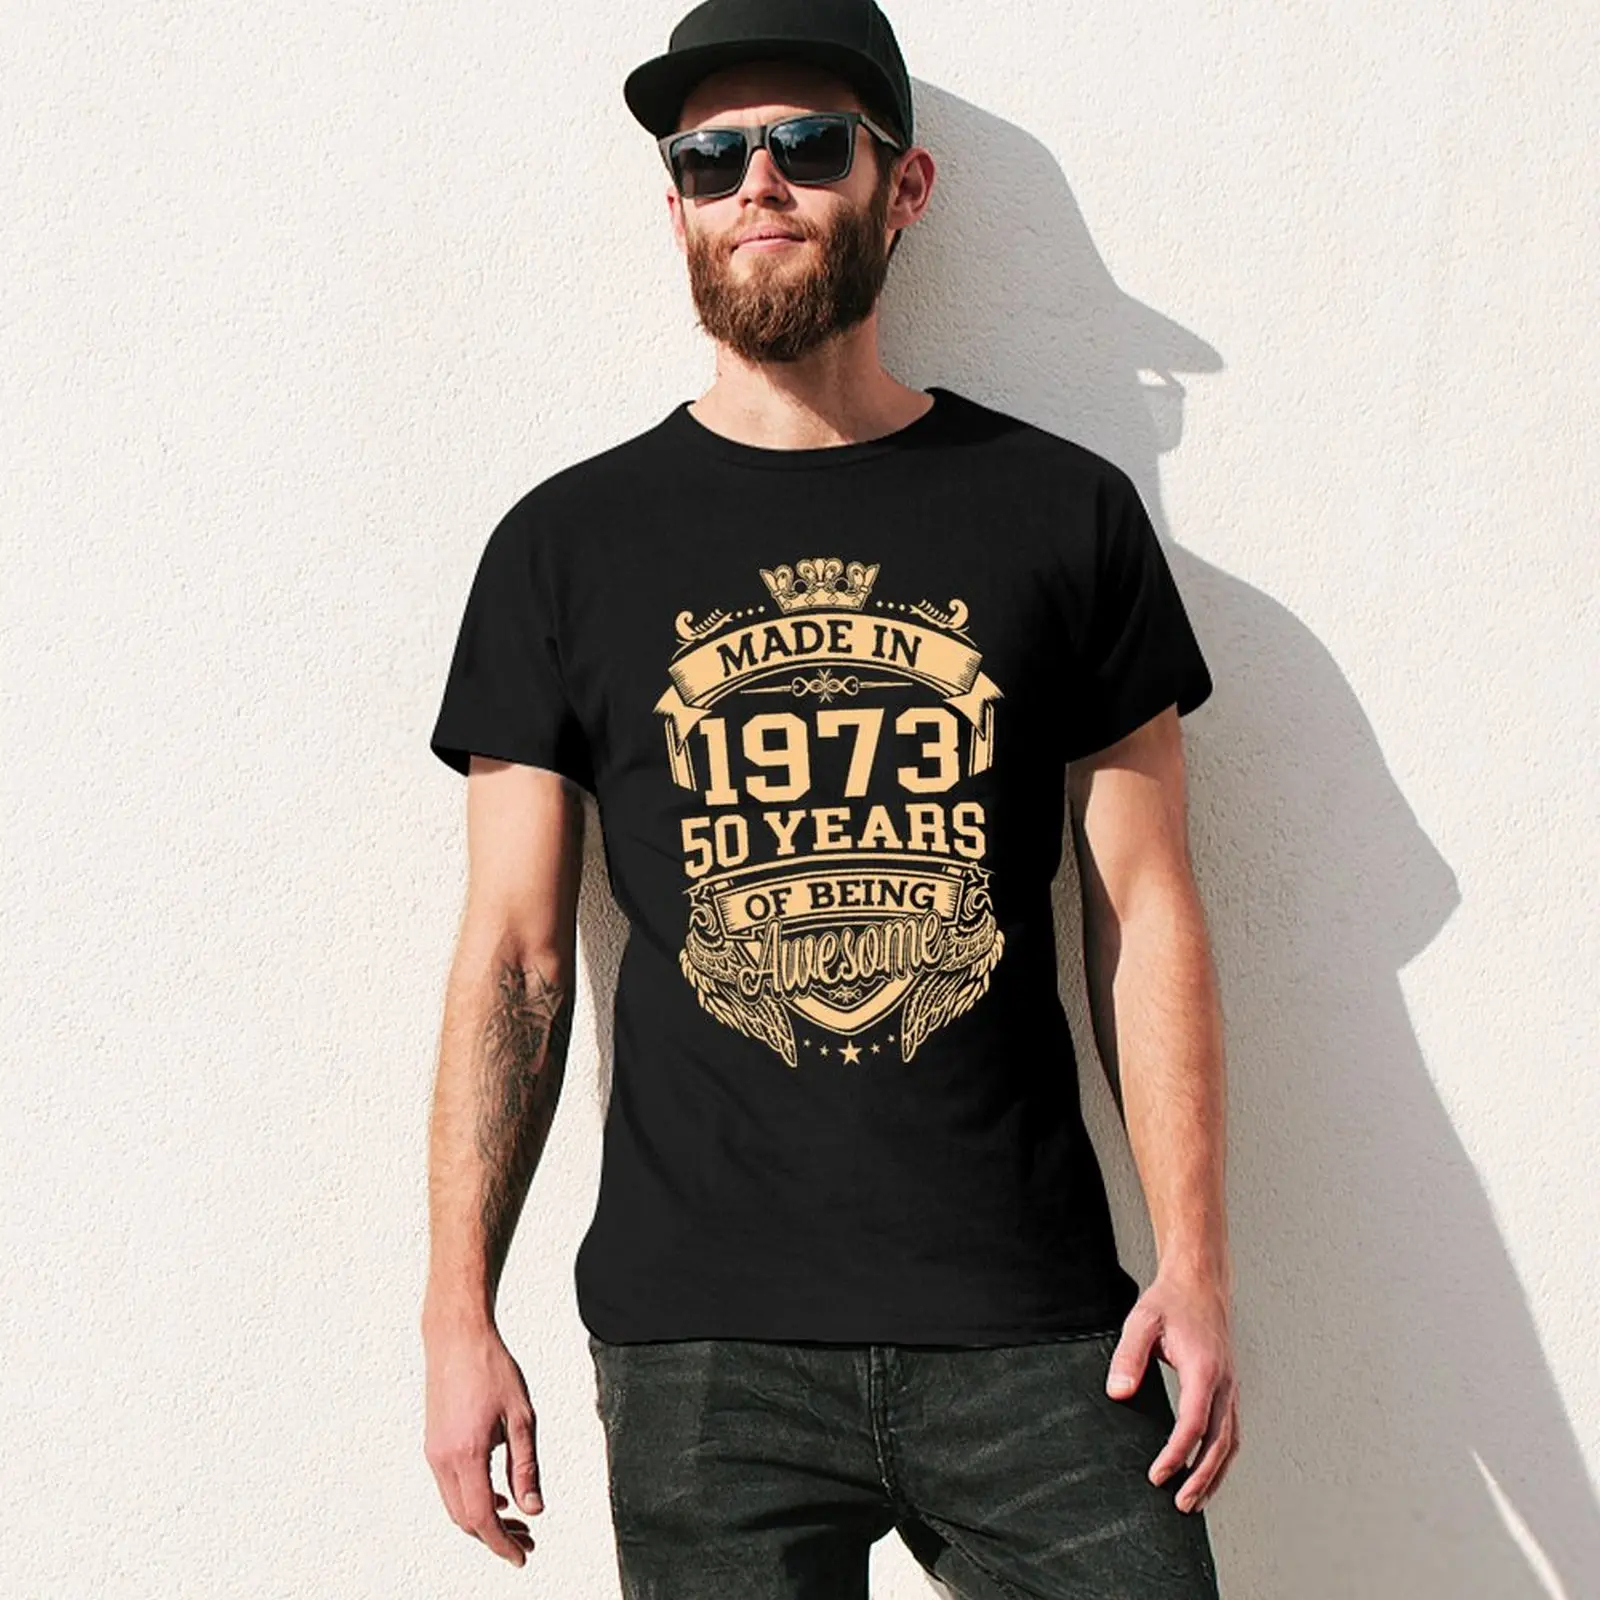 100% Cotton Made In 1973 50 Years Of Being Awesome 50th Birthday  Men's Novelty T-Shirt Tee Streetwear Women Casual Harajuku